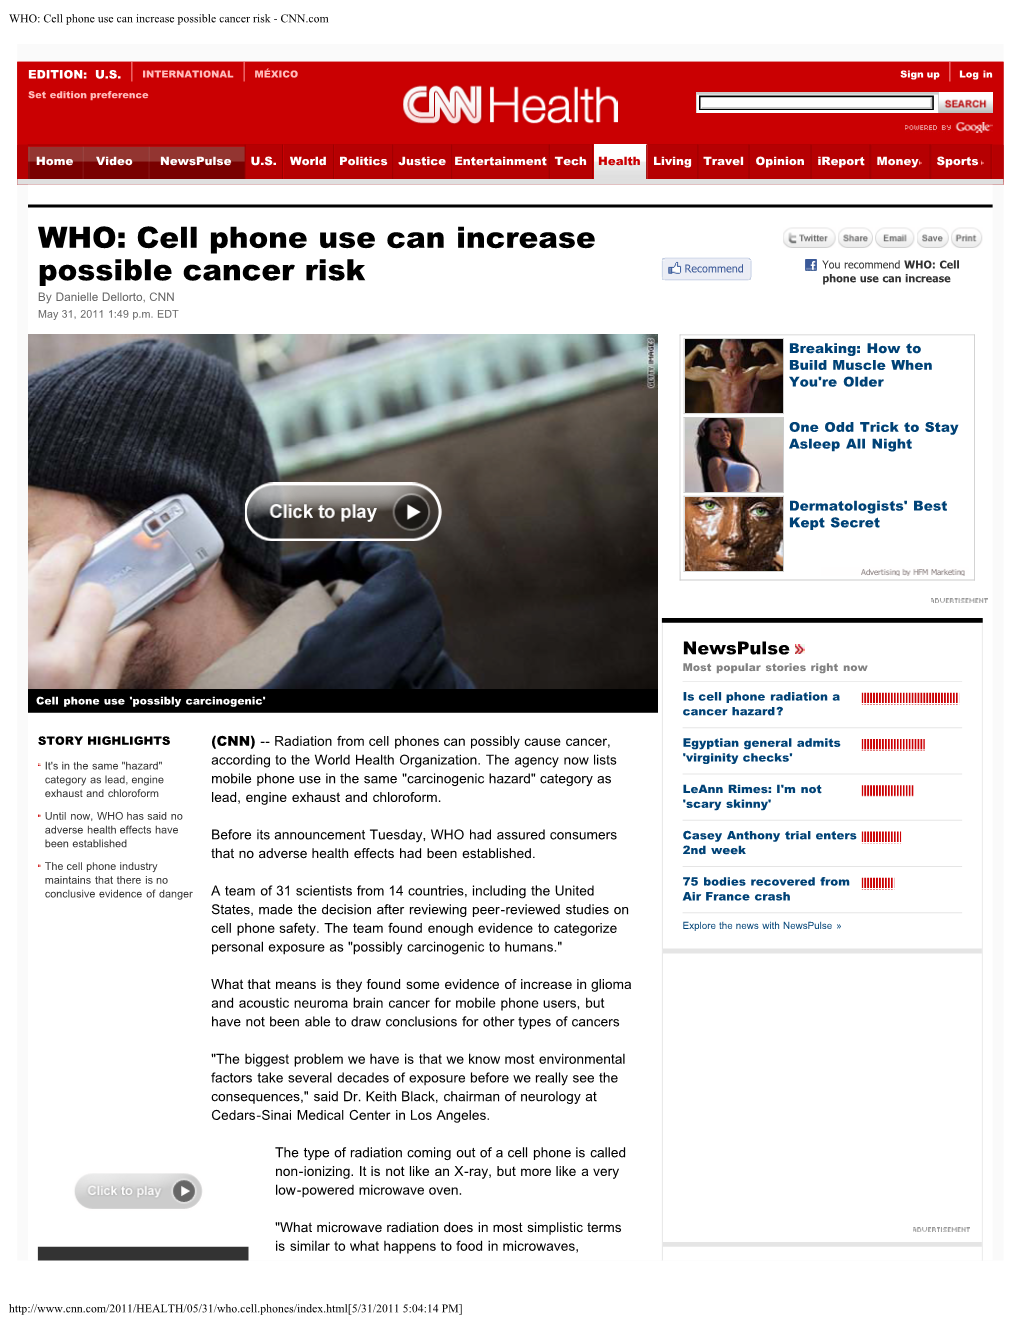 WHO: Cell Phone Use Can Increase Possible Cancer Risk - CNN.Com